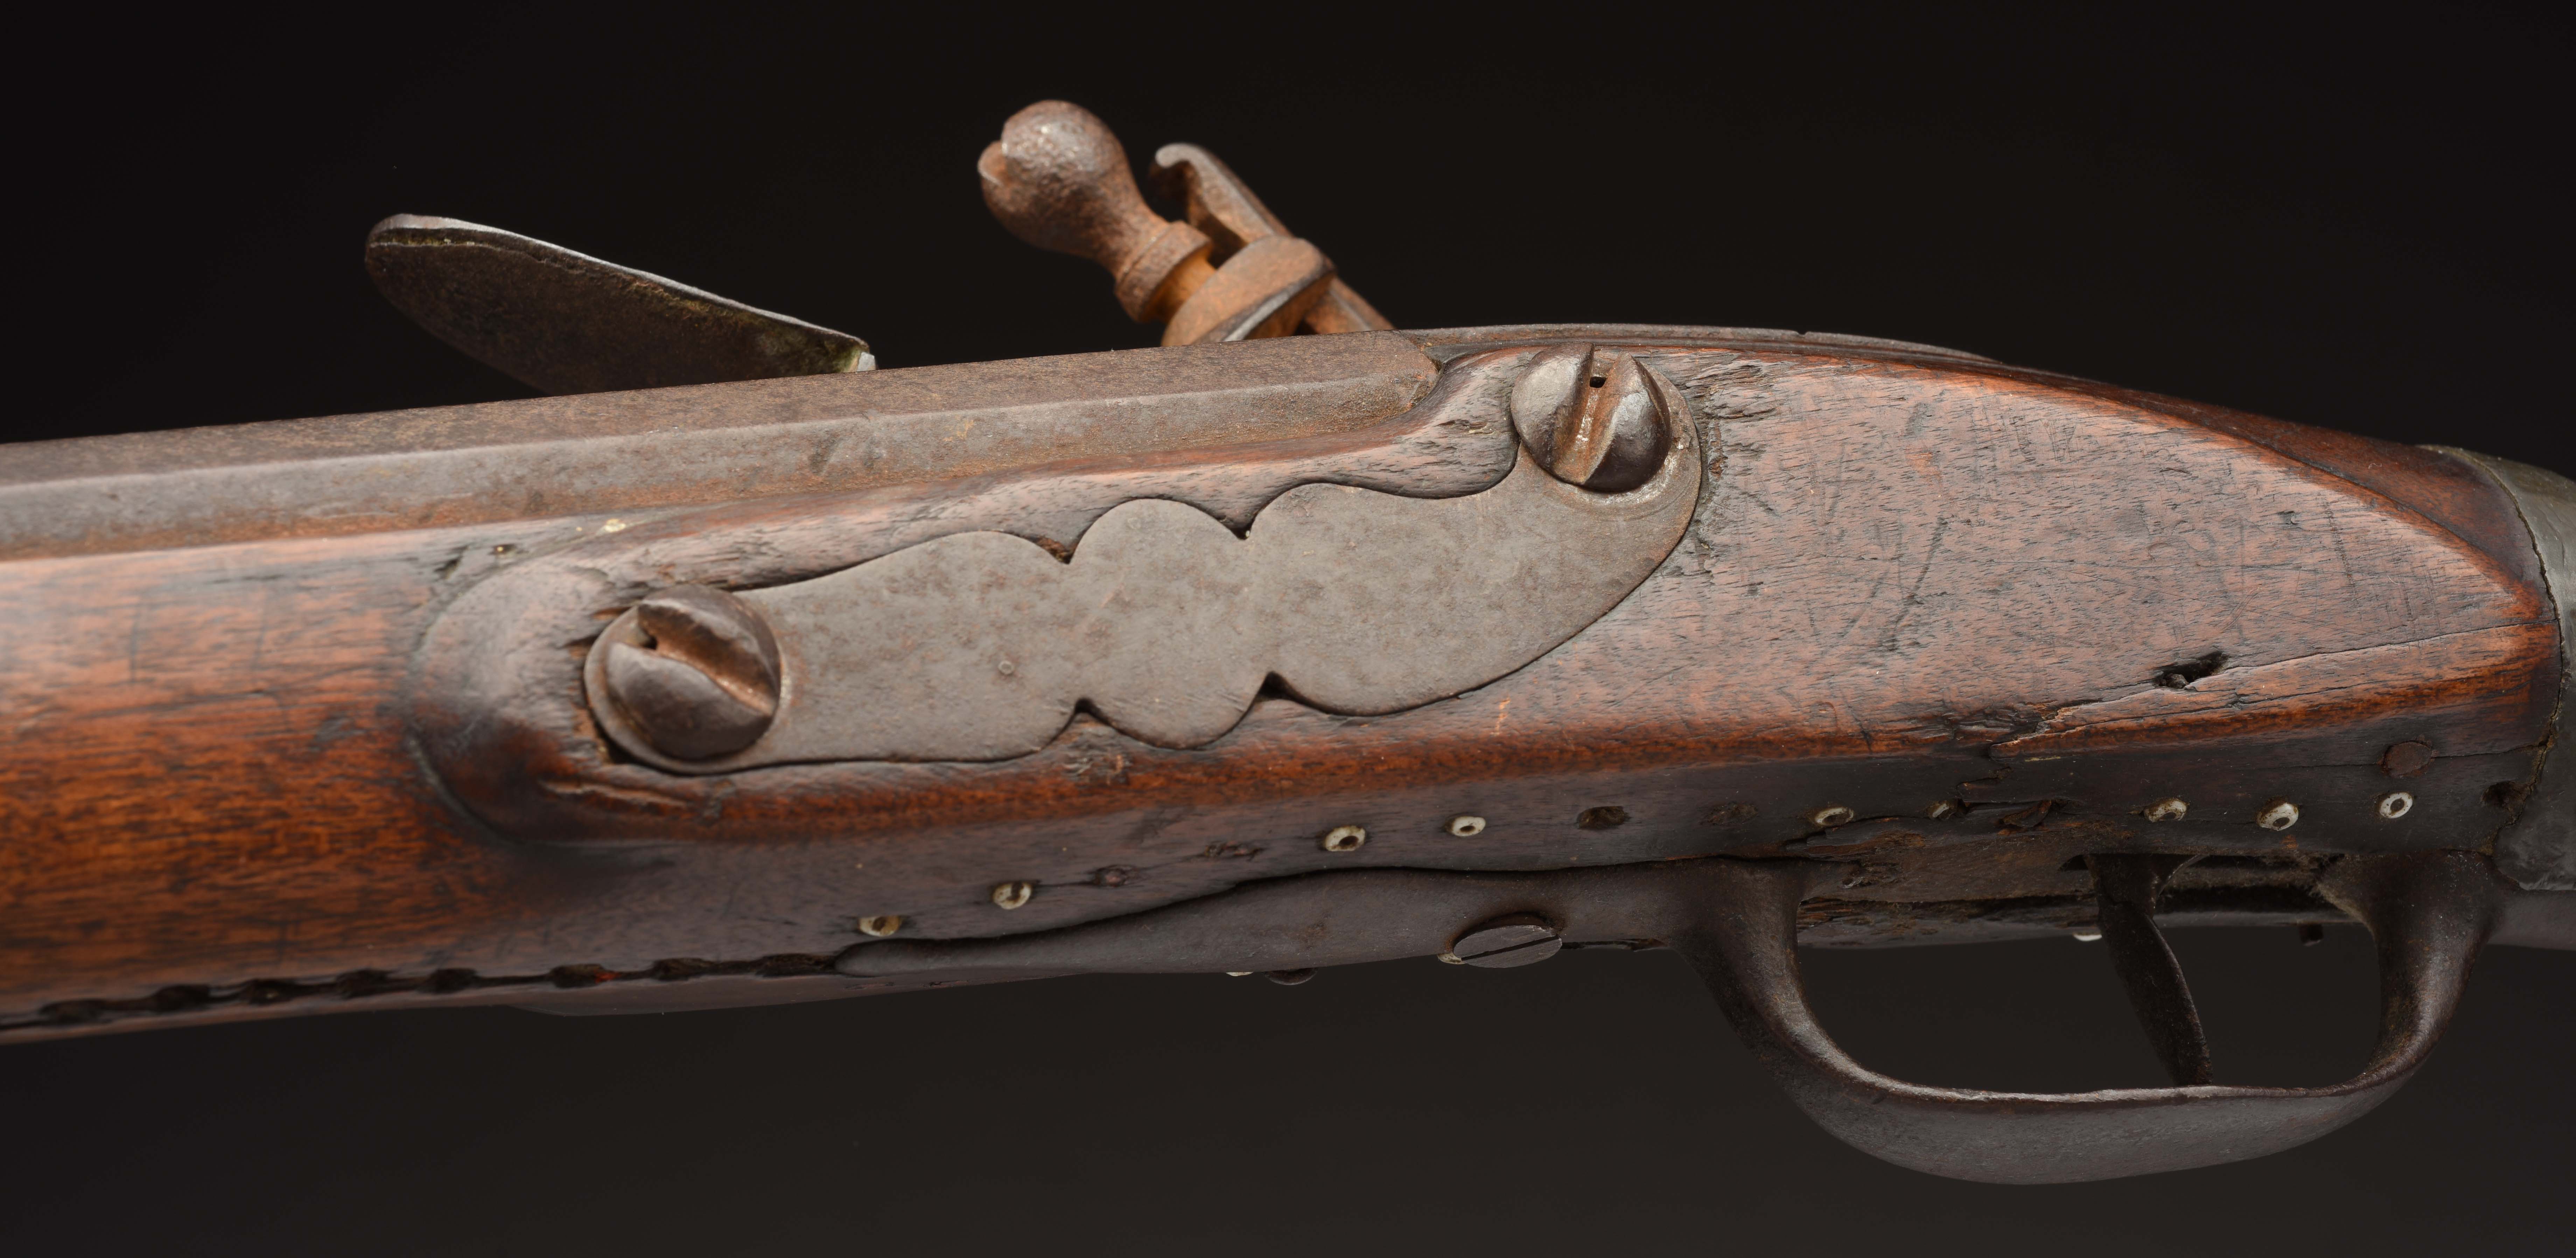 Fusils de chasse, revolvers & cannes-fusils. - NYPL Digital Collections